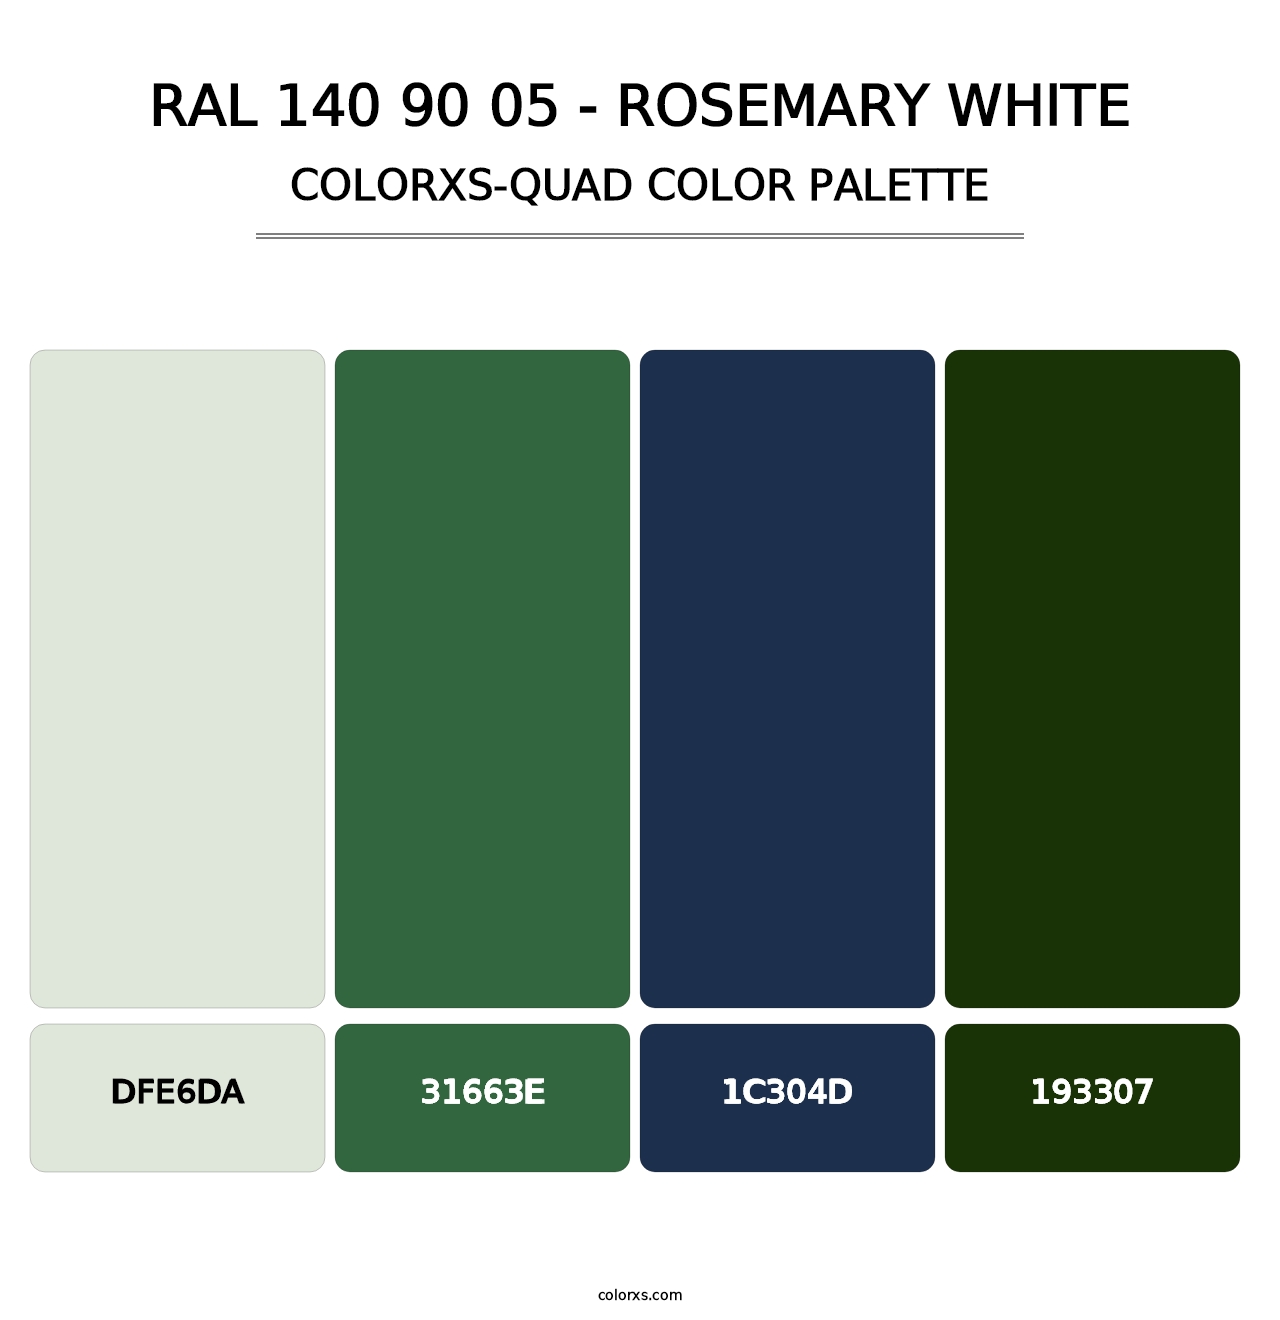 RAL 140 90 05 - Rosemary White - Colorxs Quad Palette